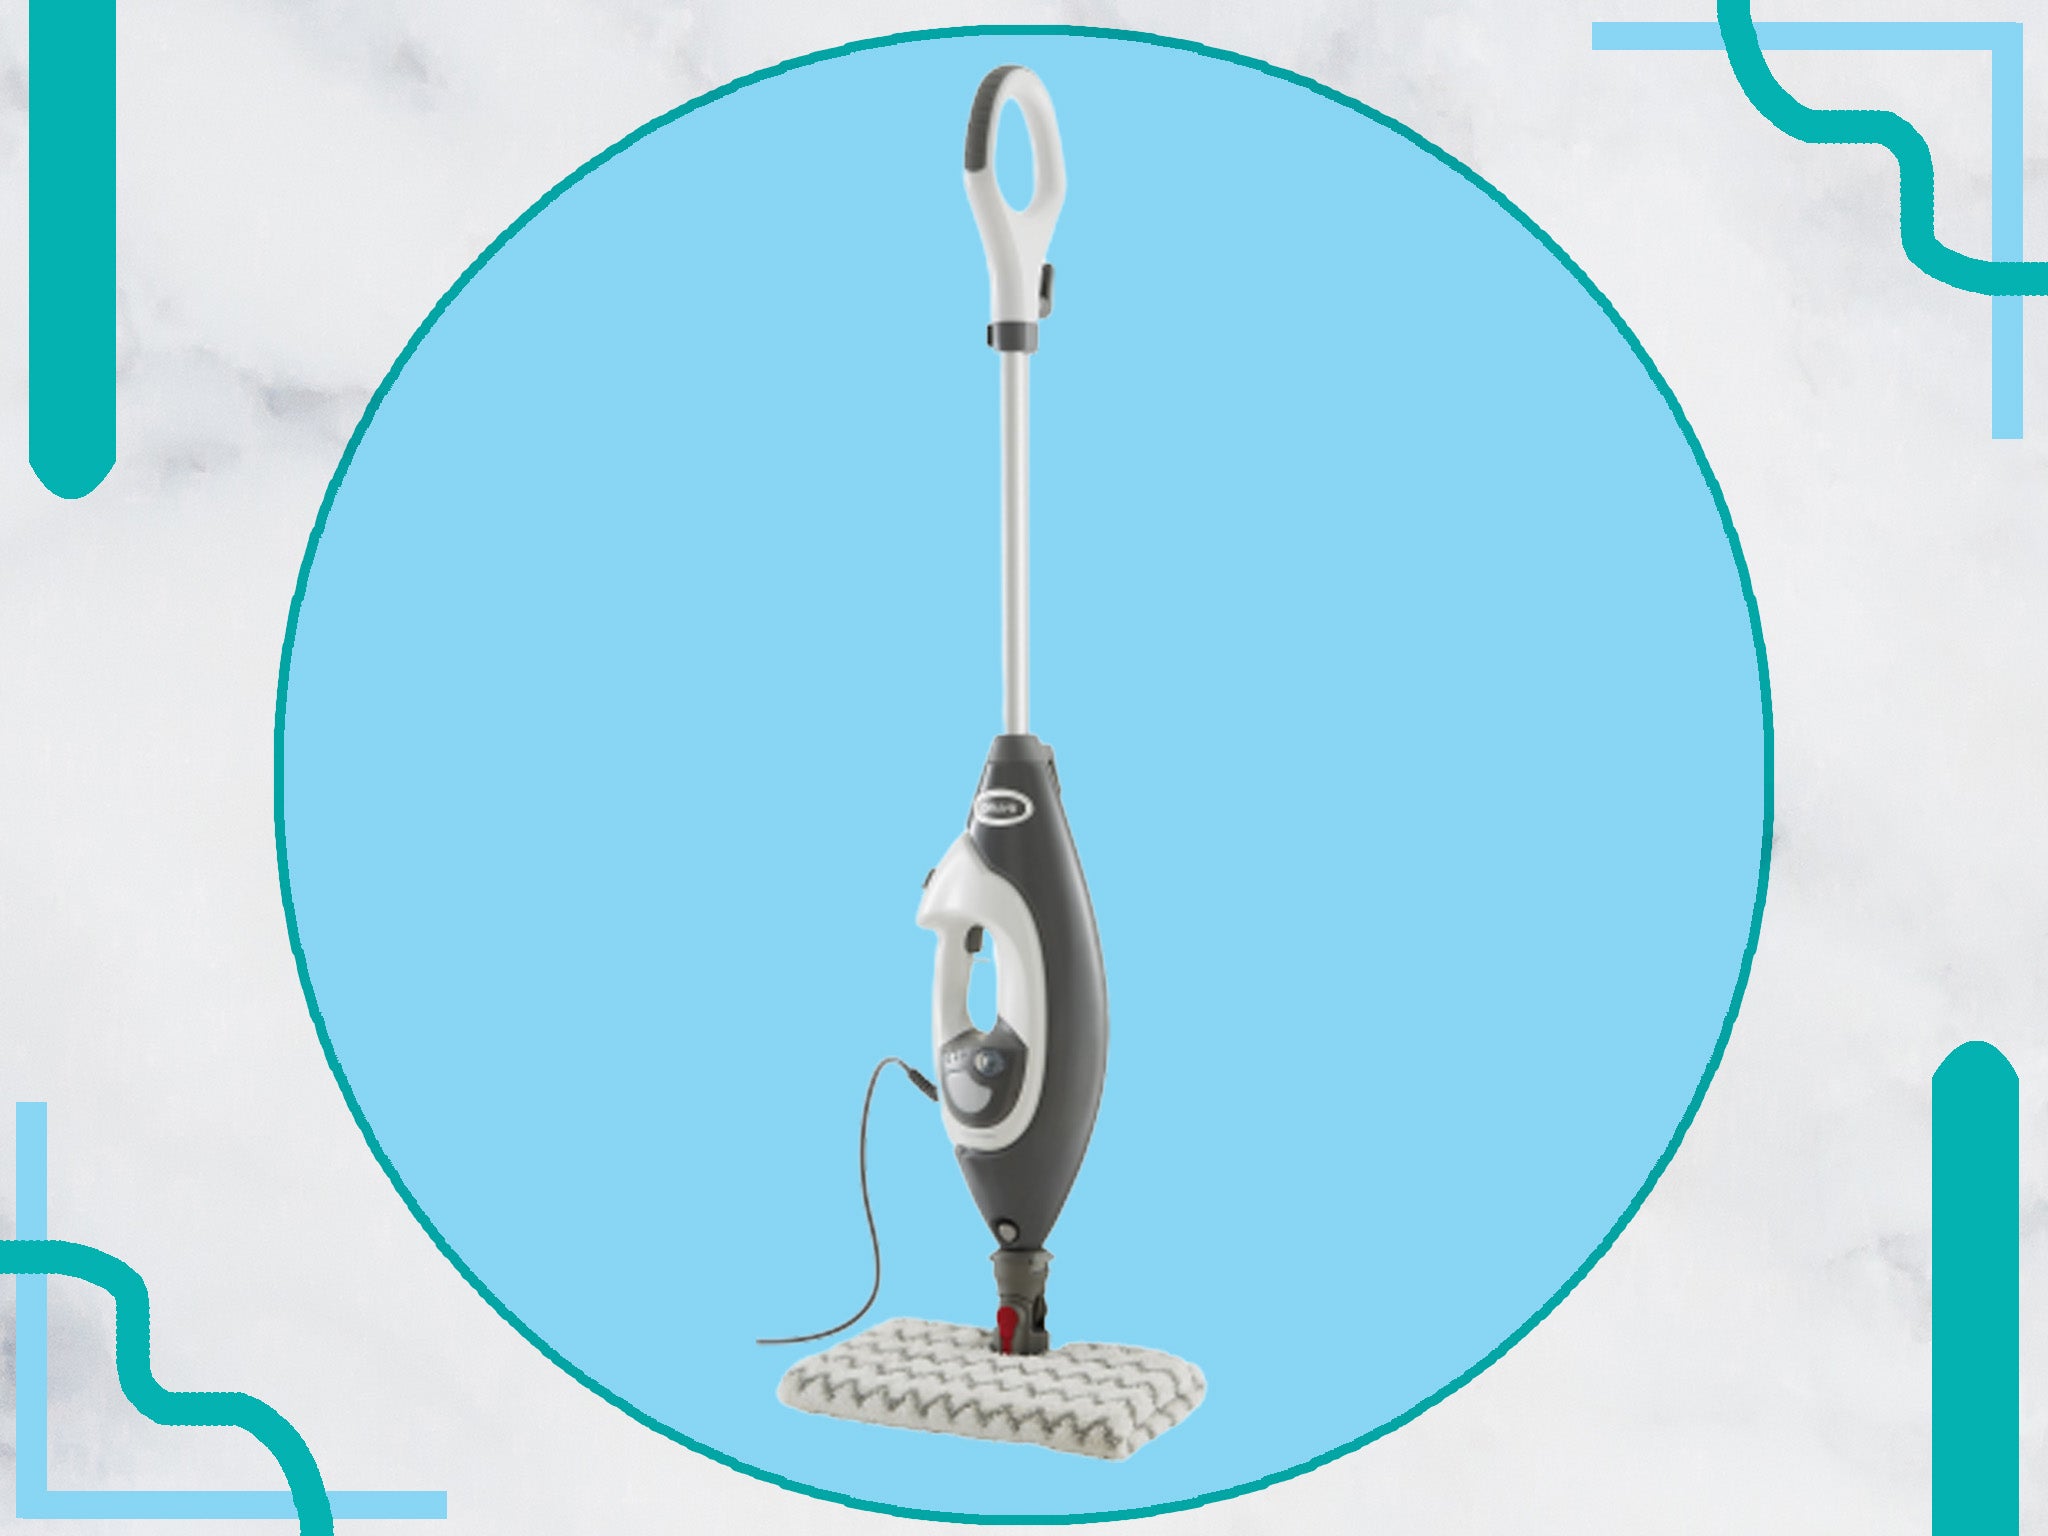 Shark steam mop review: Will the new steam cleaner transform your floors?